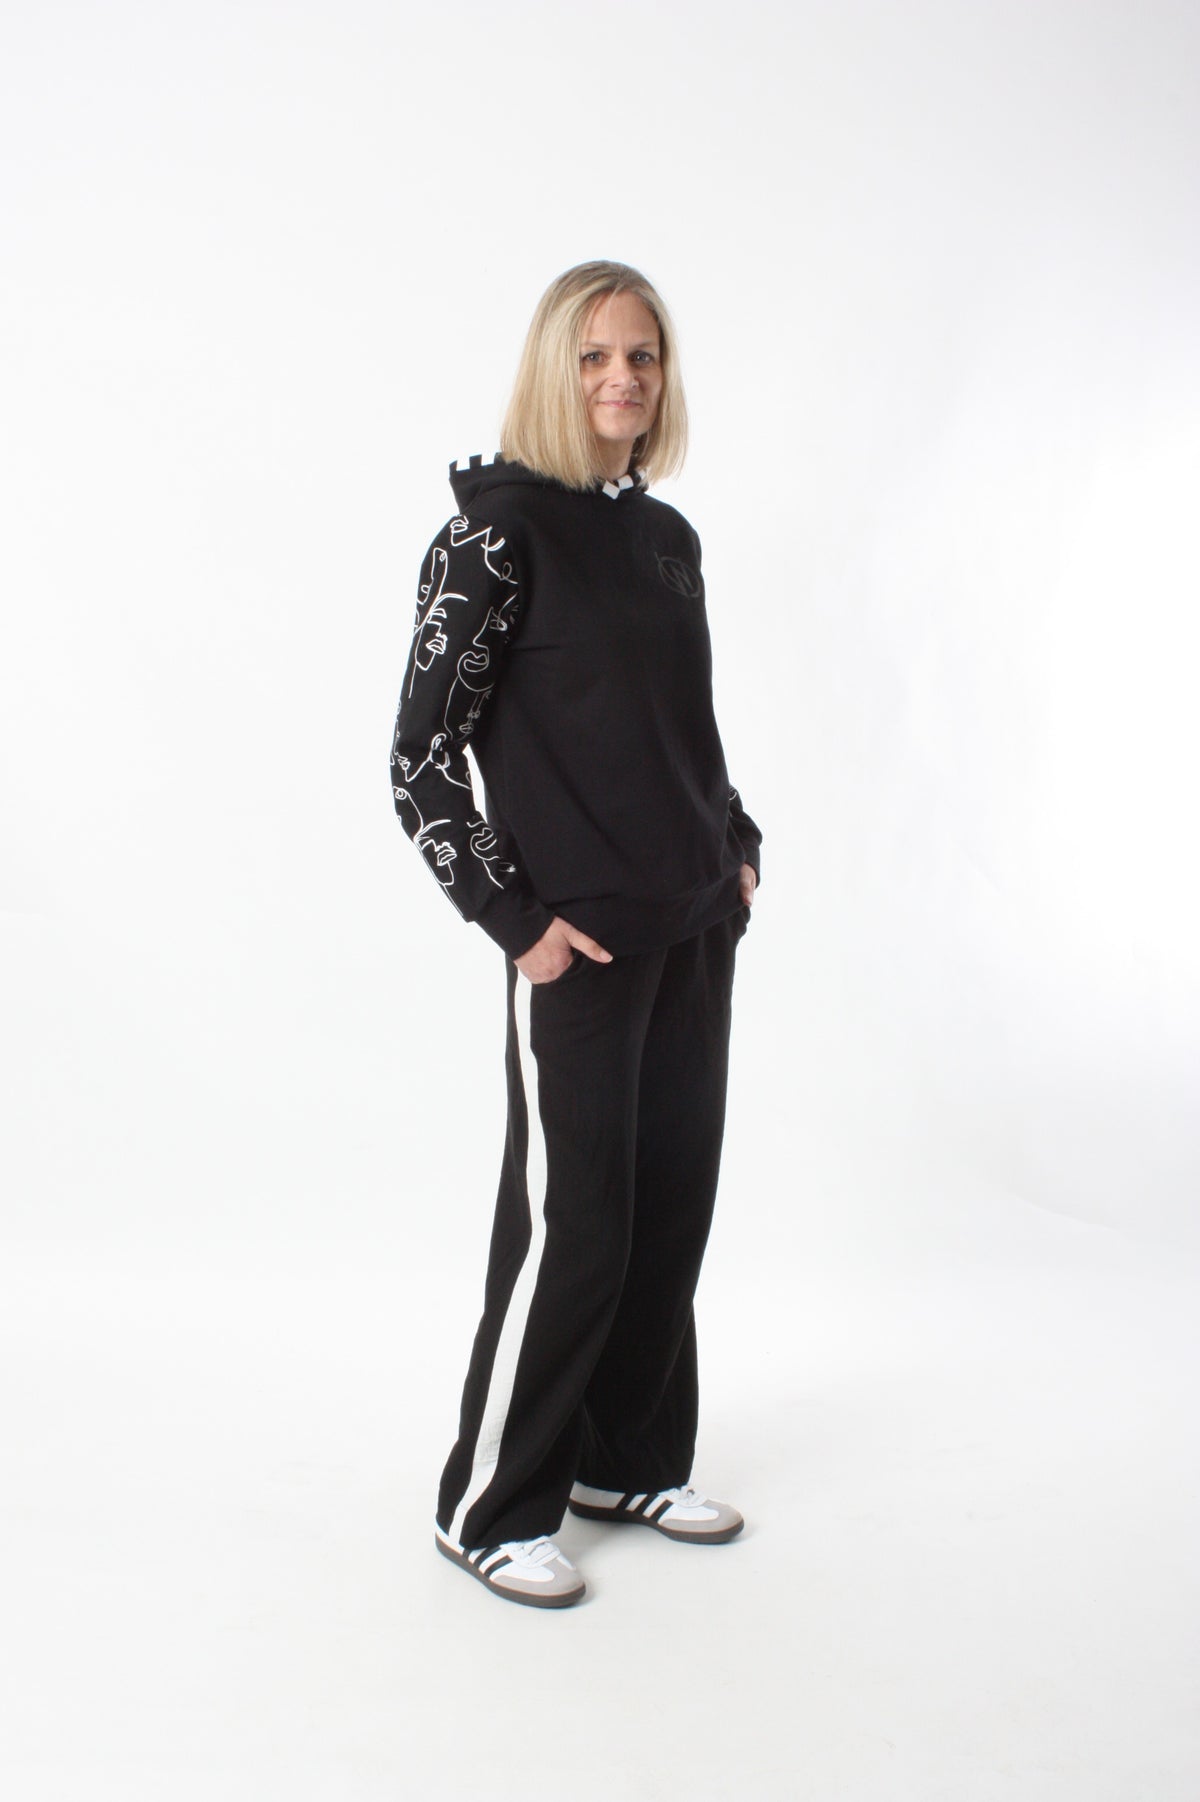 Holly Hoodie - Black with White faces print sleeves